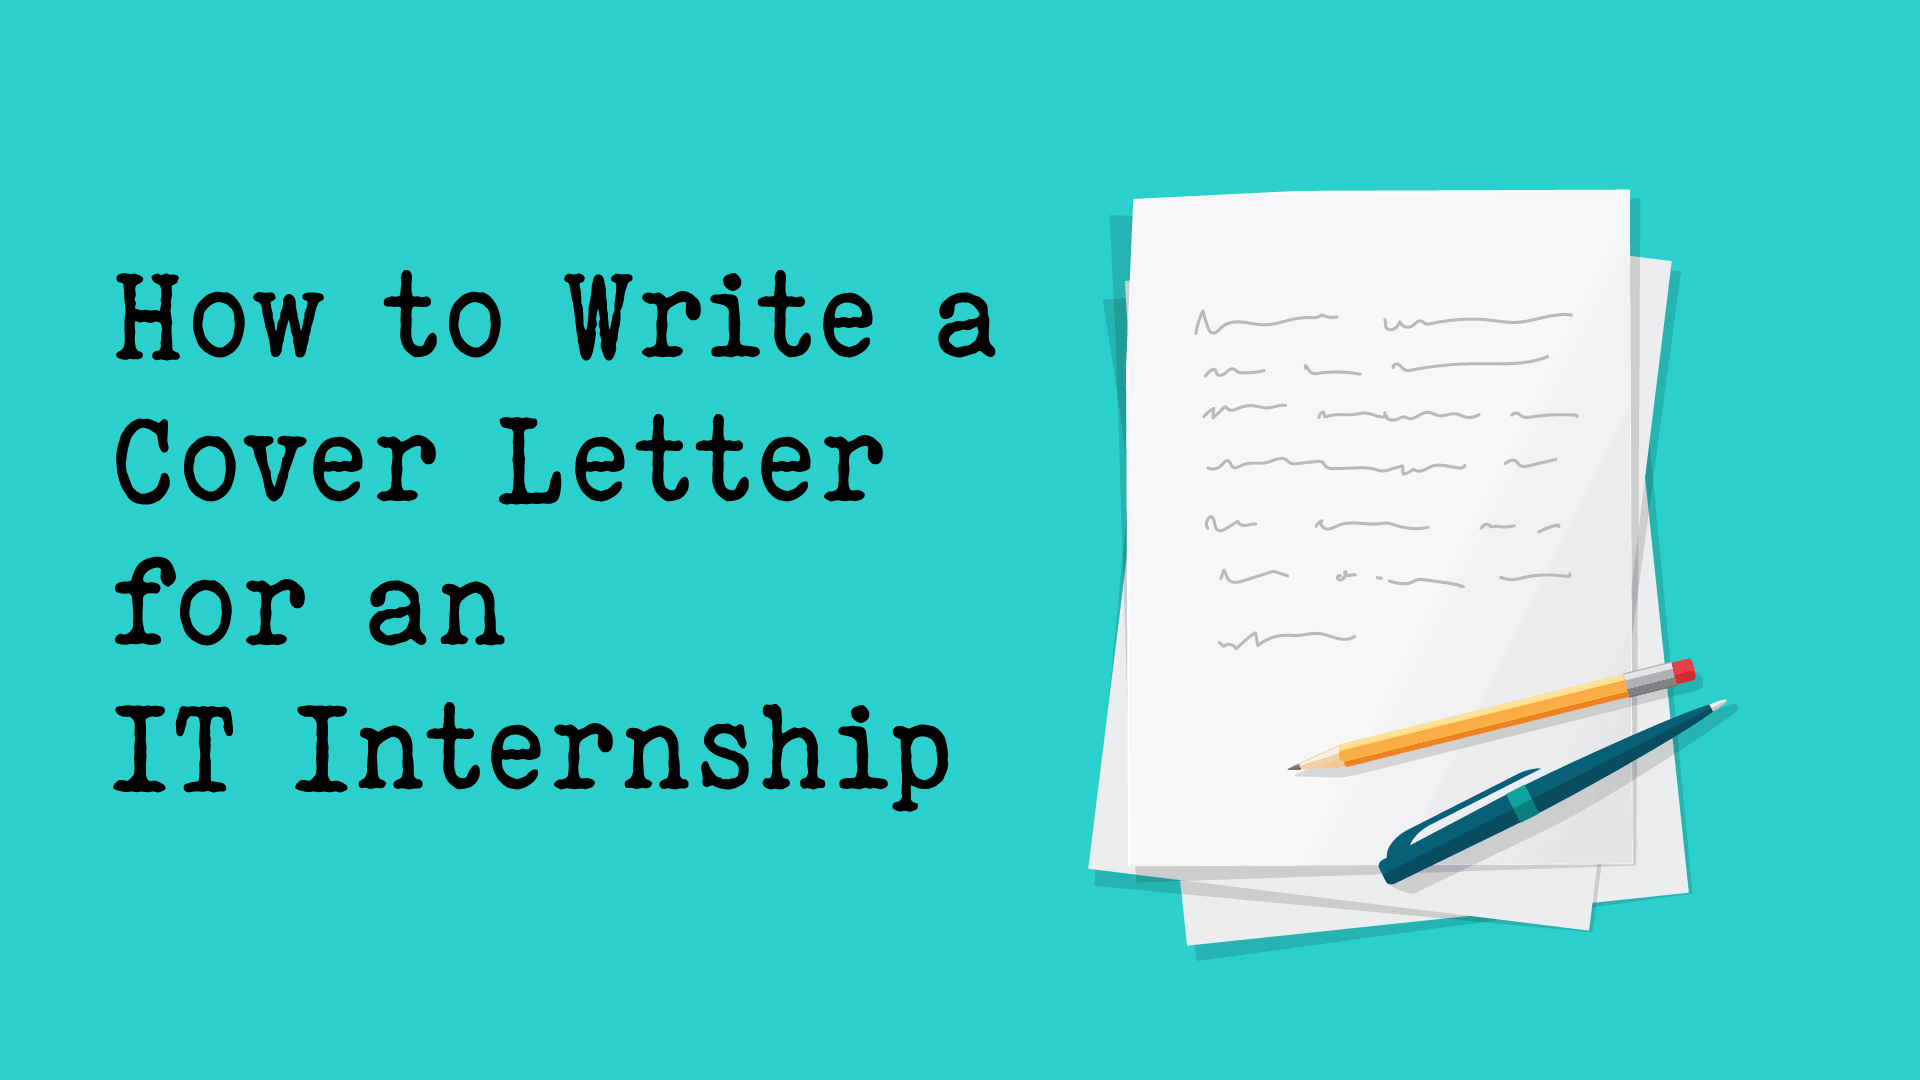 IT Internship Cover Letter writing ideas